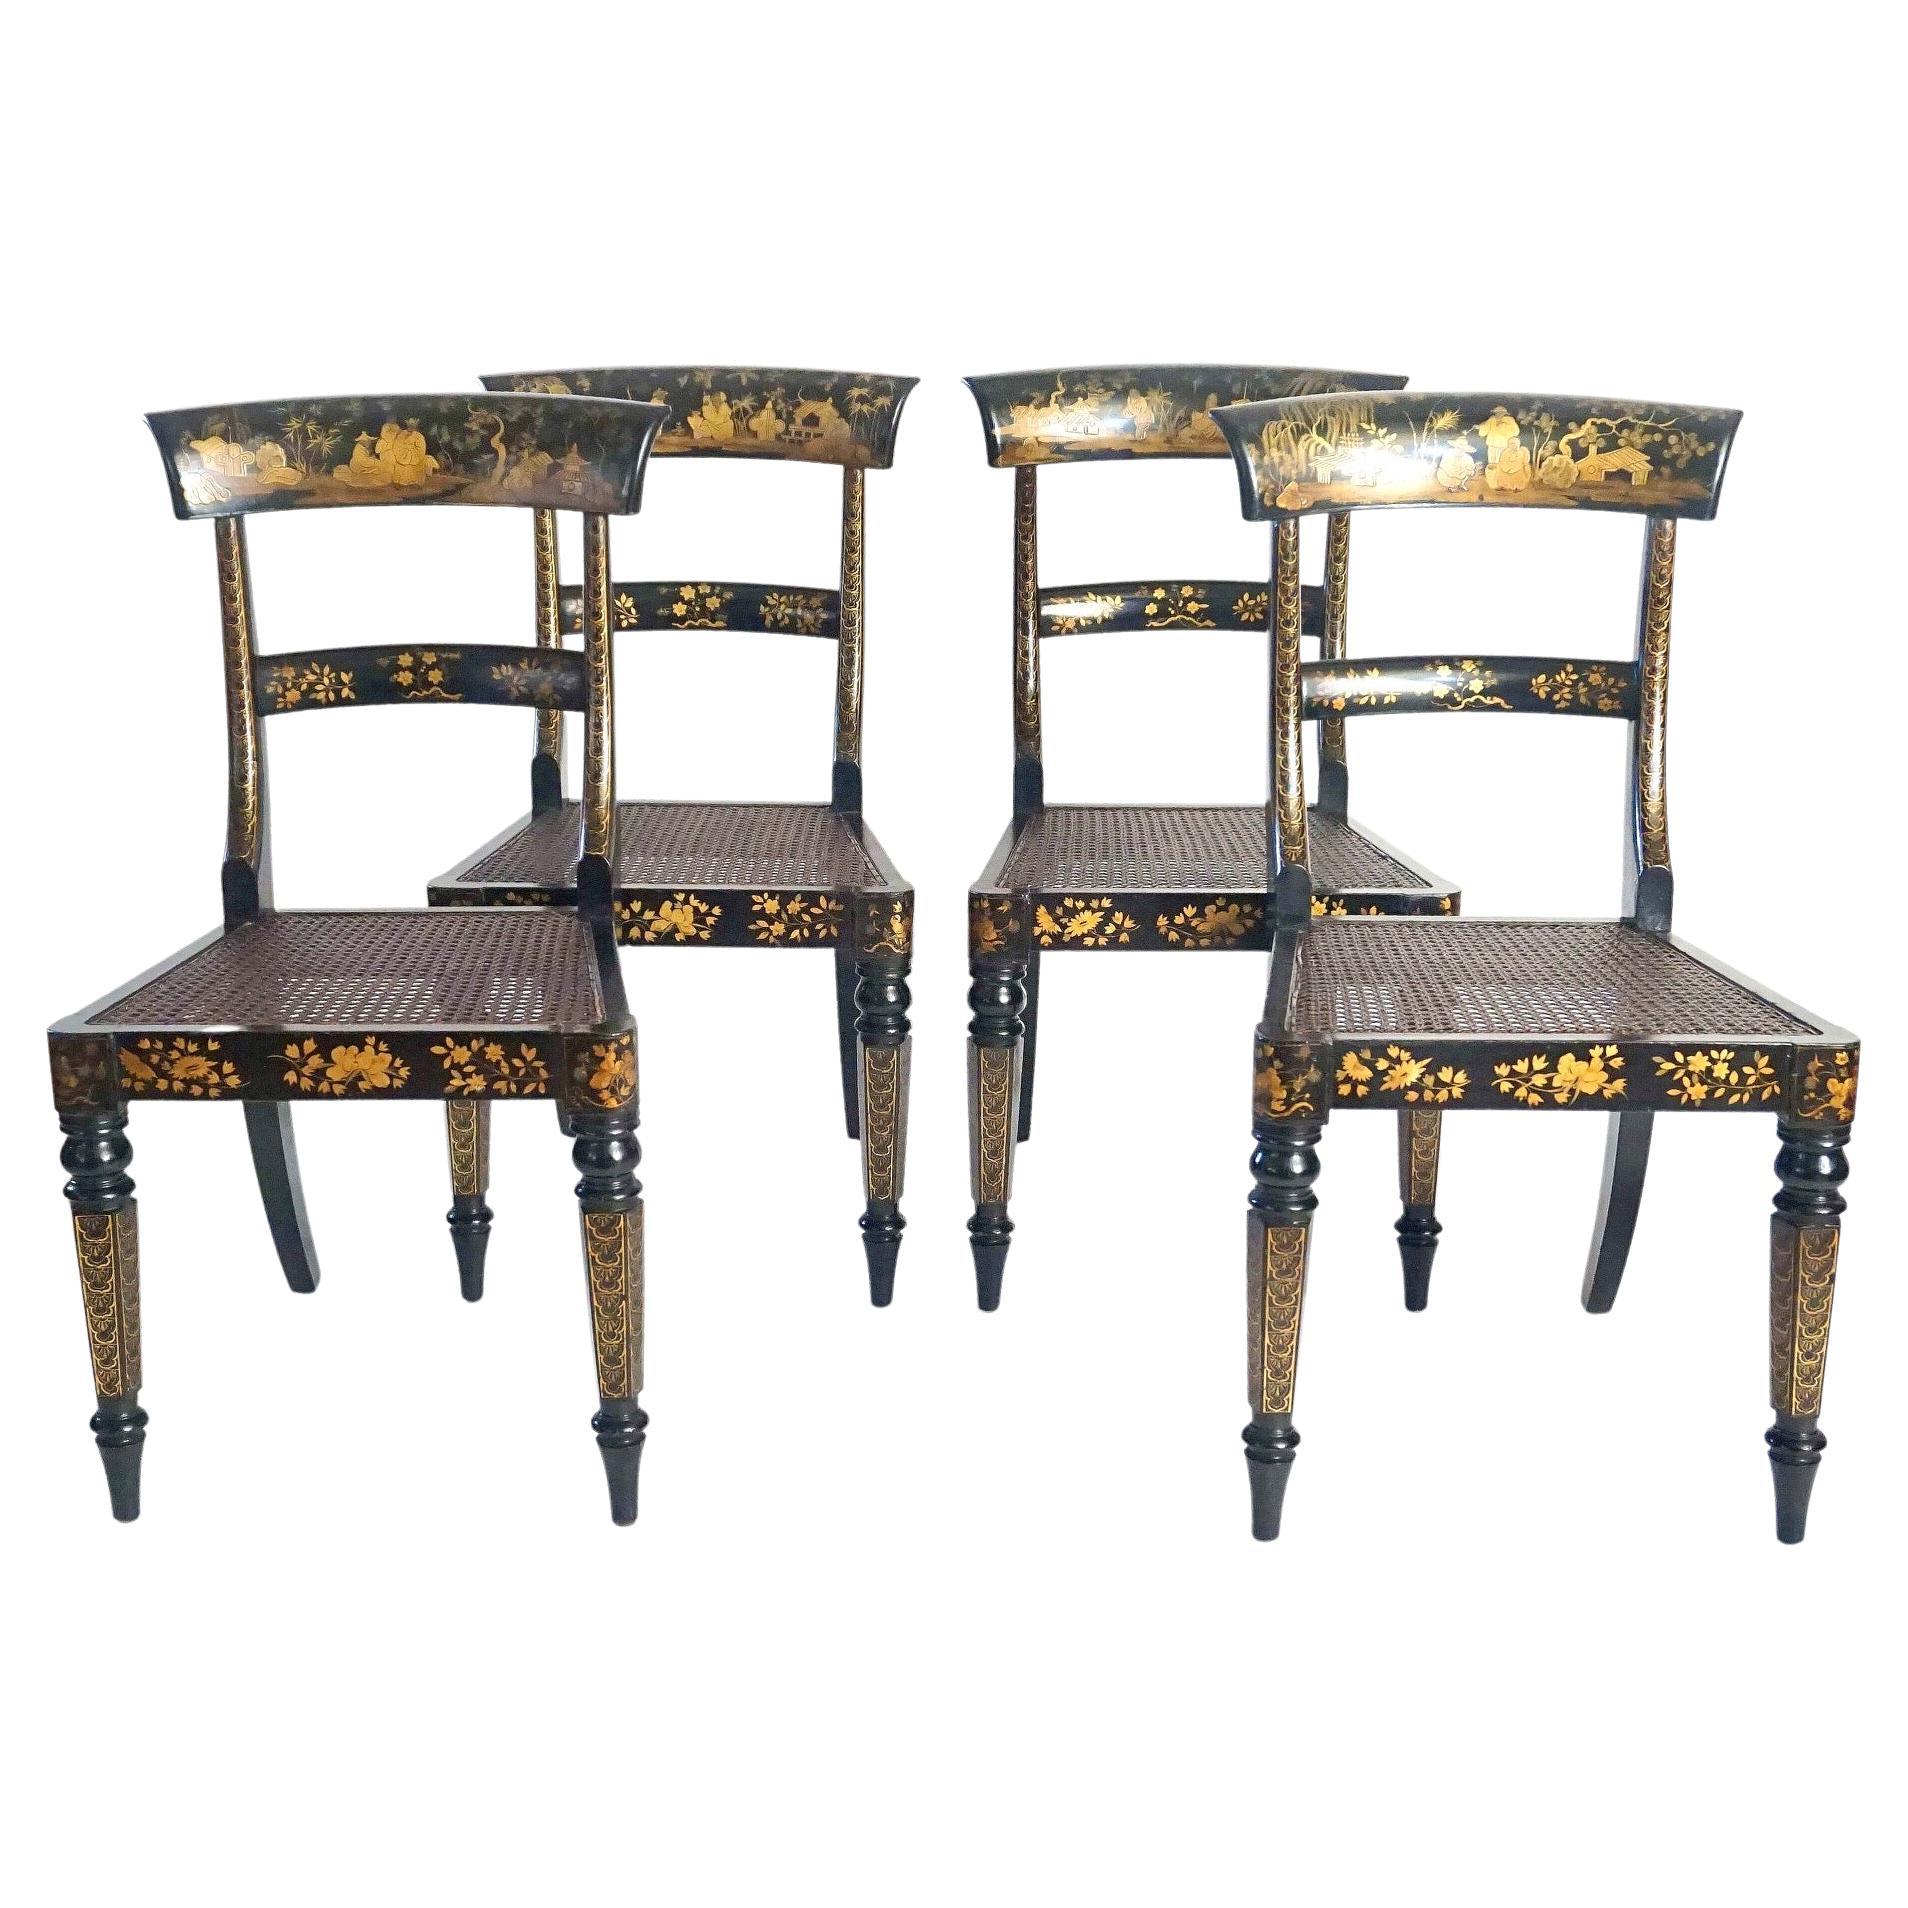 English Chinoiserie Chairs, Ex-Garvan Collection Yale University, circa 1835 For Sale